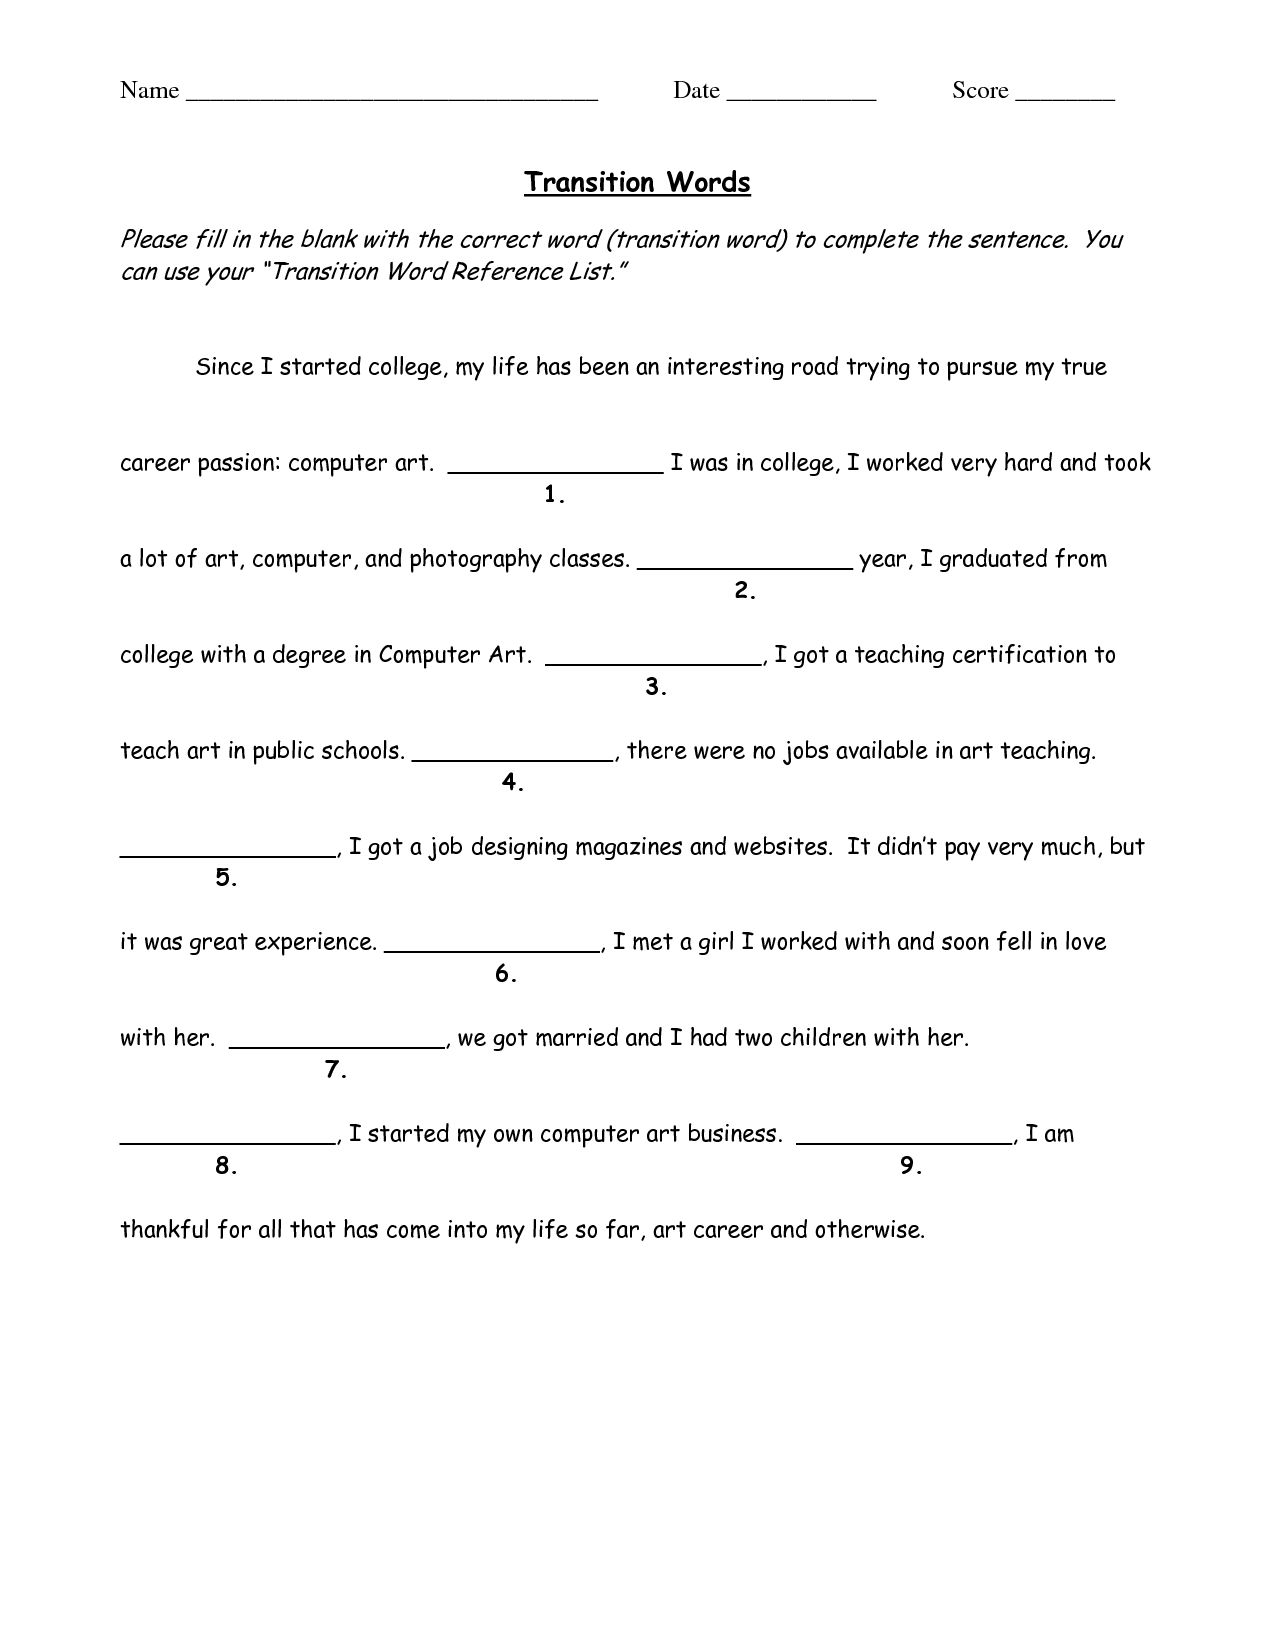 transition-words-worksheets-for-high-school